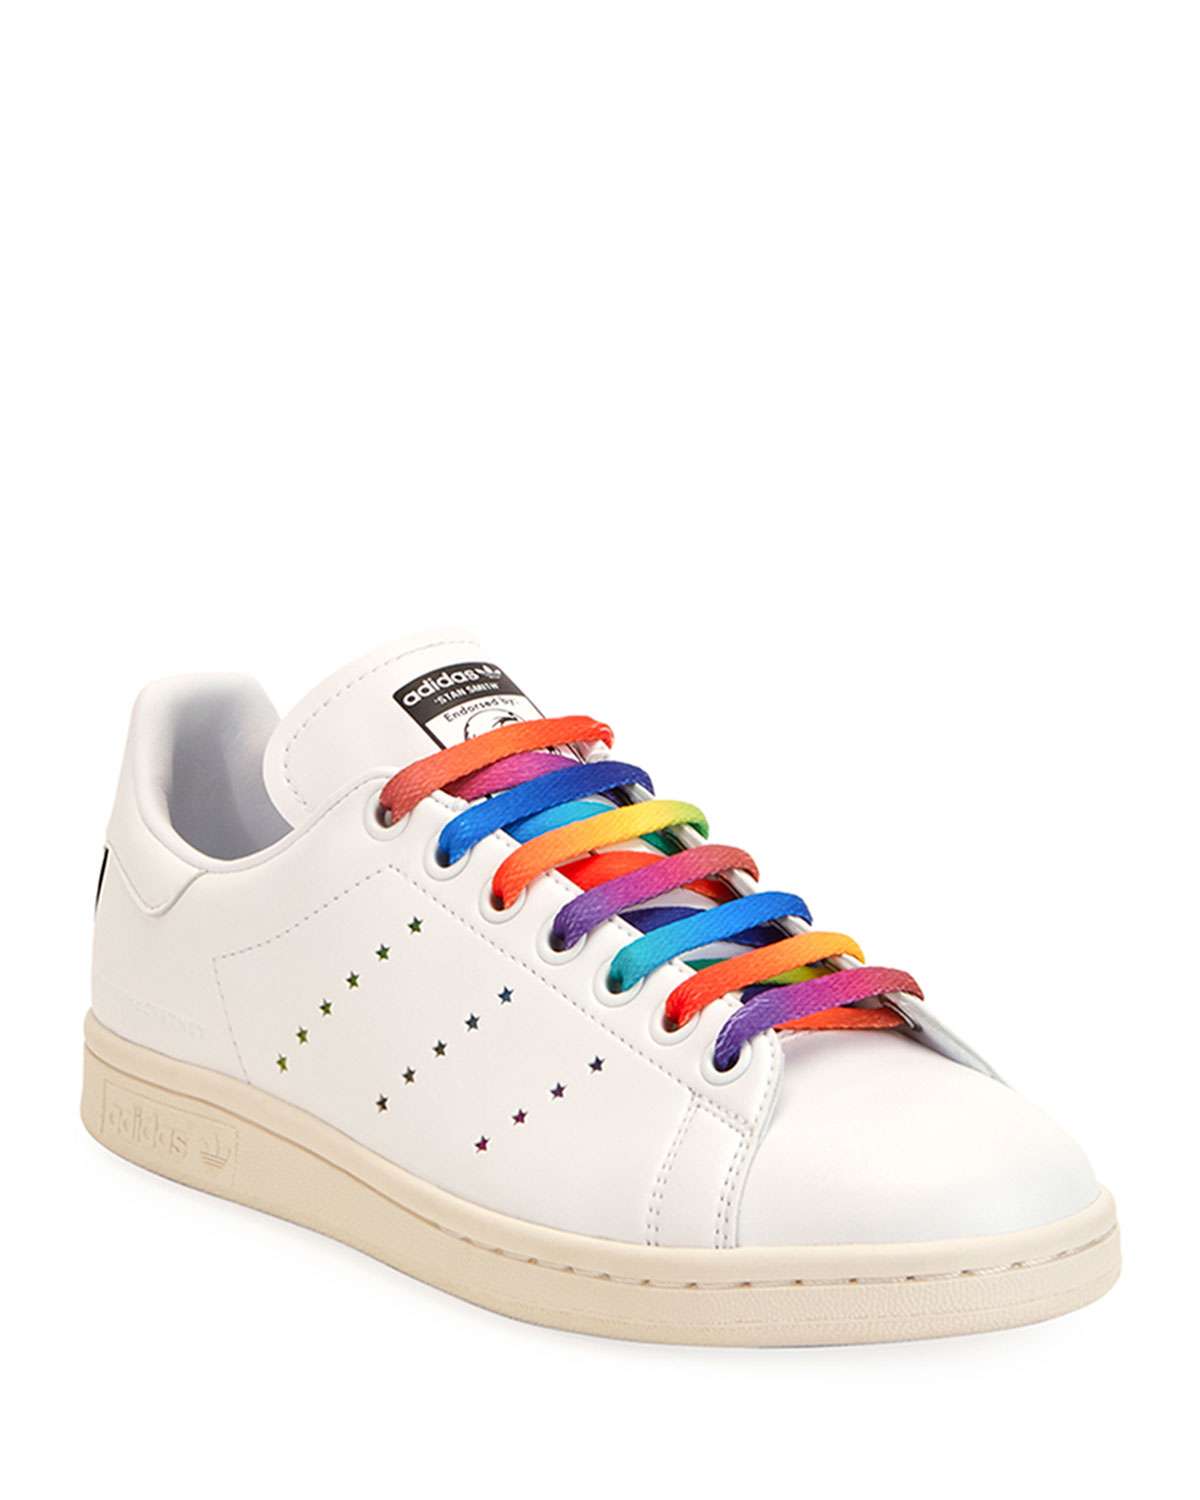 Stella McCartney Stan Smith Sneakers with Rainbow Laces ...